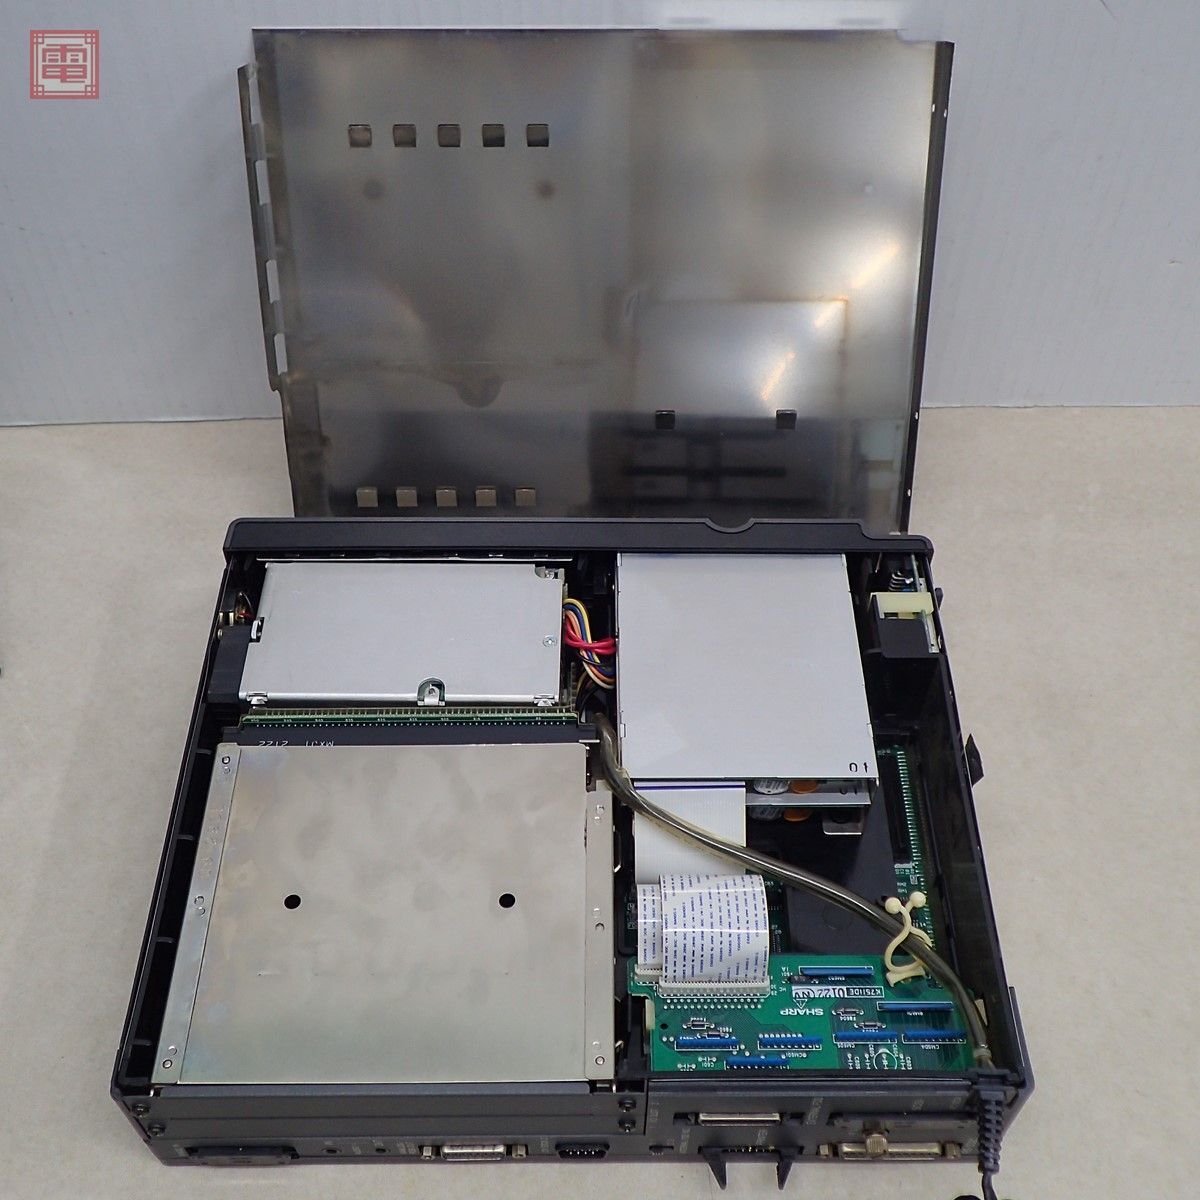 1 jpy ~ SHARP X68000compact XVI (CZ-674C-H) body only sharp * electrolysis condenser replaced Junk parts taking .. please [20